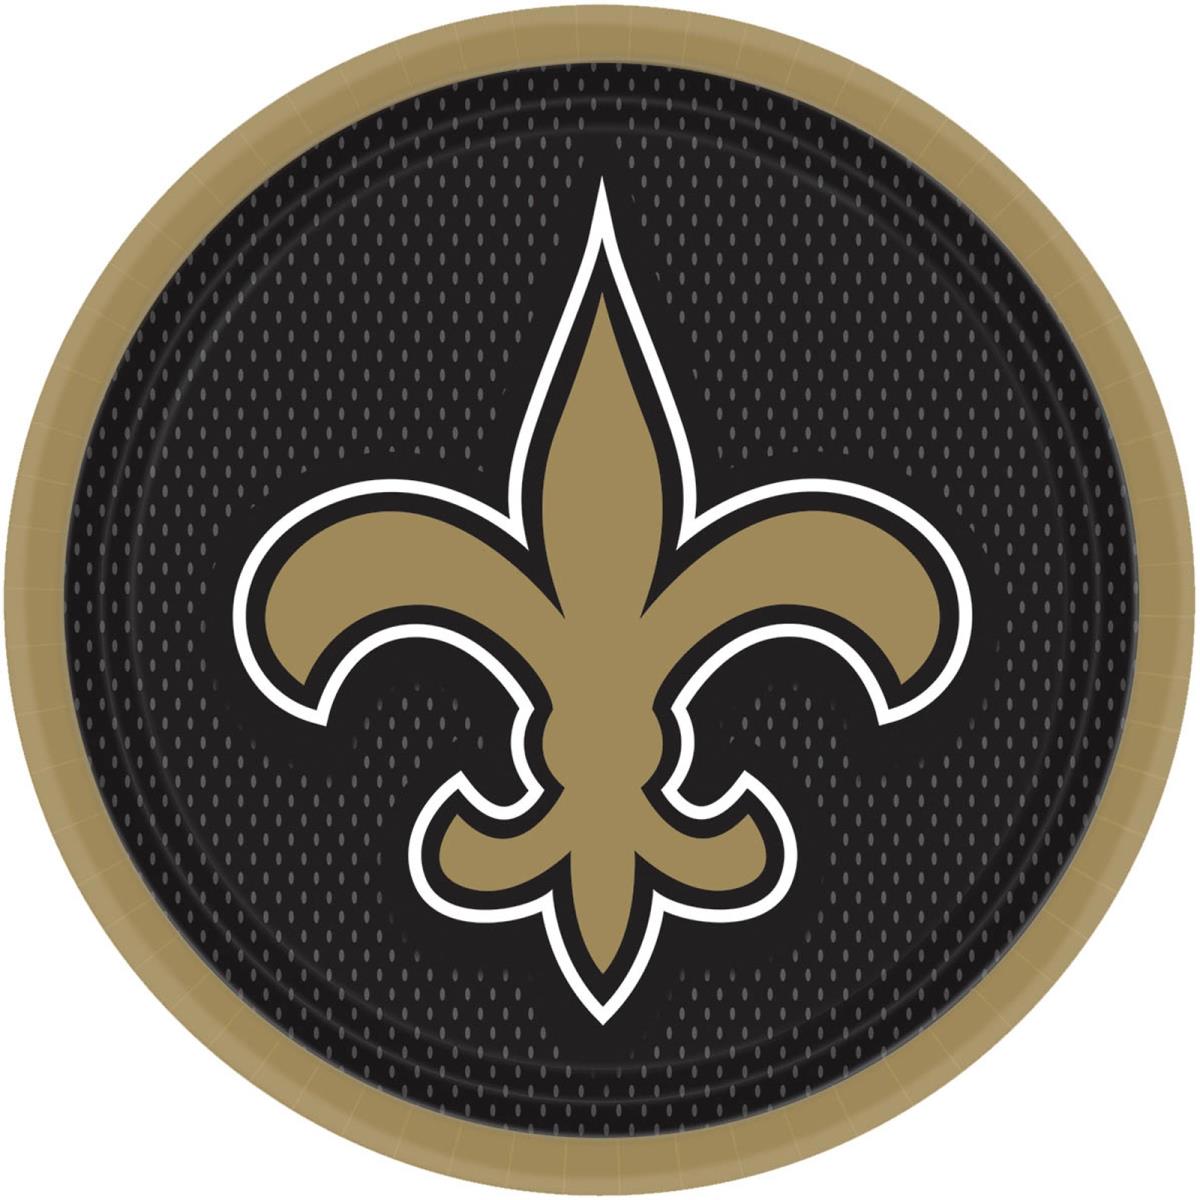 Picture of Amscan 239702 New Orleans Saints Dinner Plates - 8 Piece